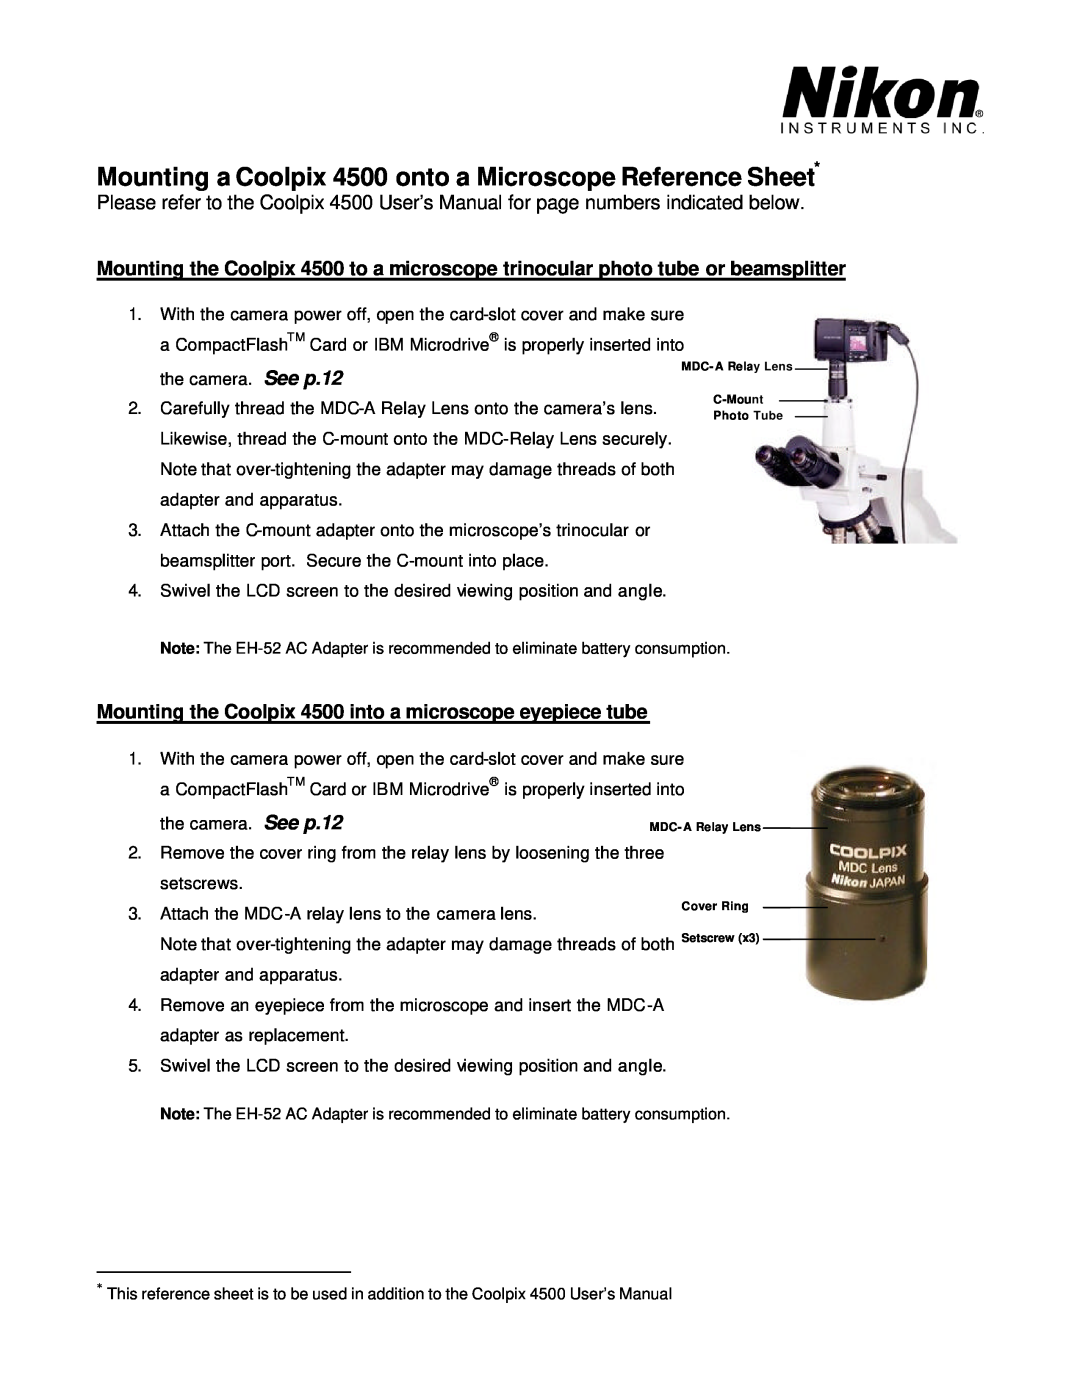 Nikon user manual Mounting the Coolpix 4500 into a microscope eyepiece tube, the camera. See p.12 